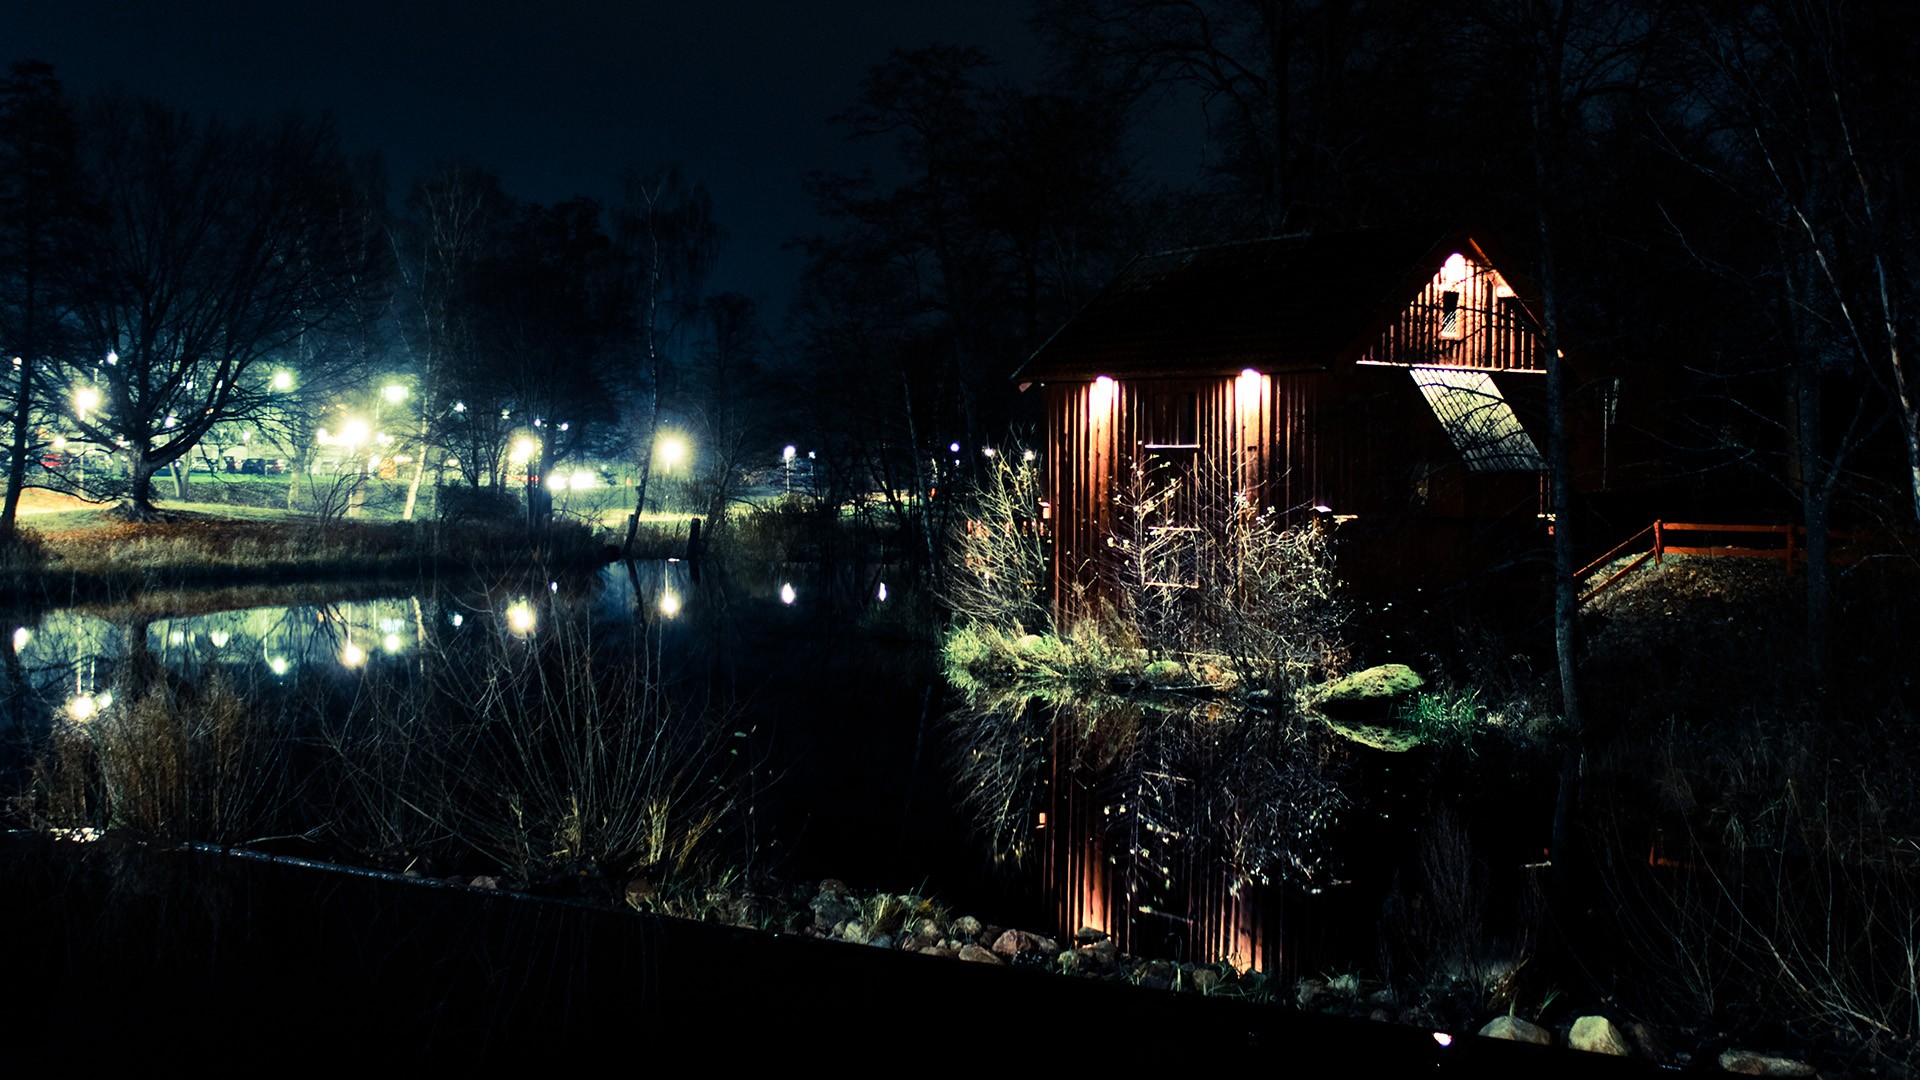 water, Landscapes, Winter, Night, Buildings, Canon, Tagnotallowedtoosubjective Wallpaper